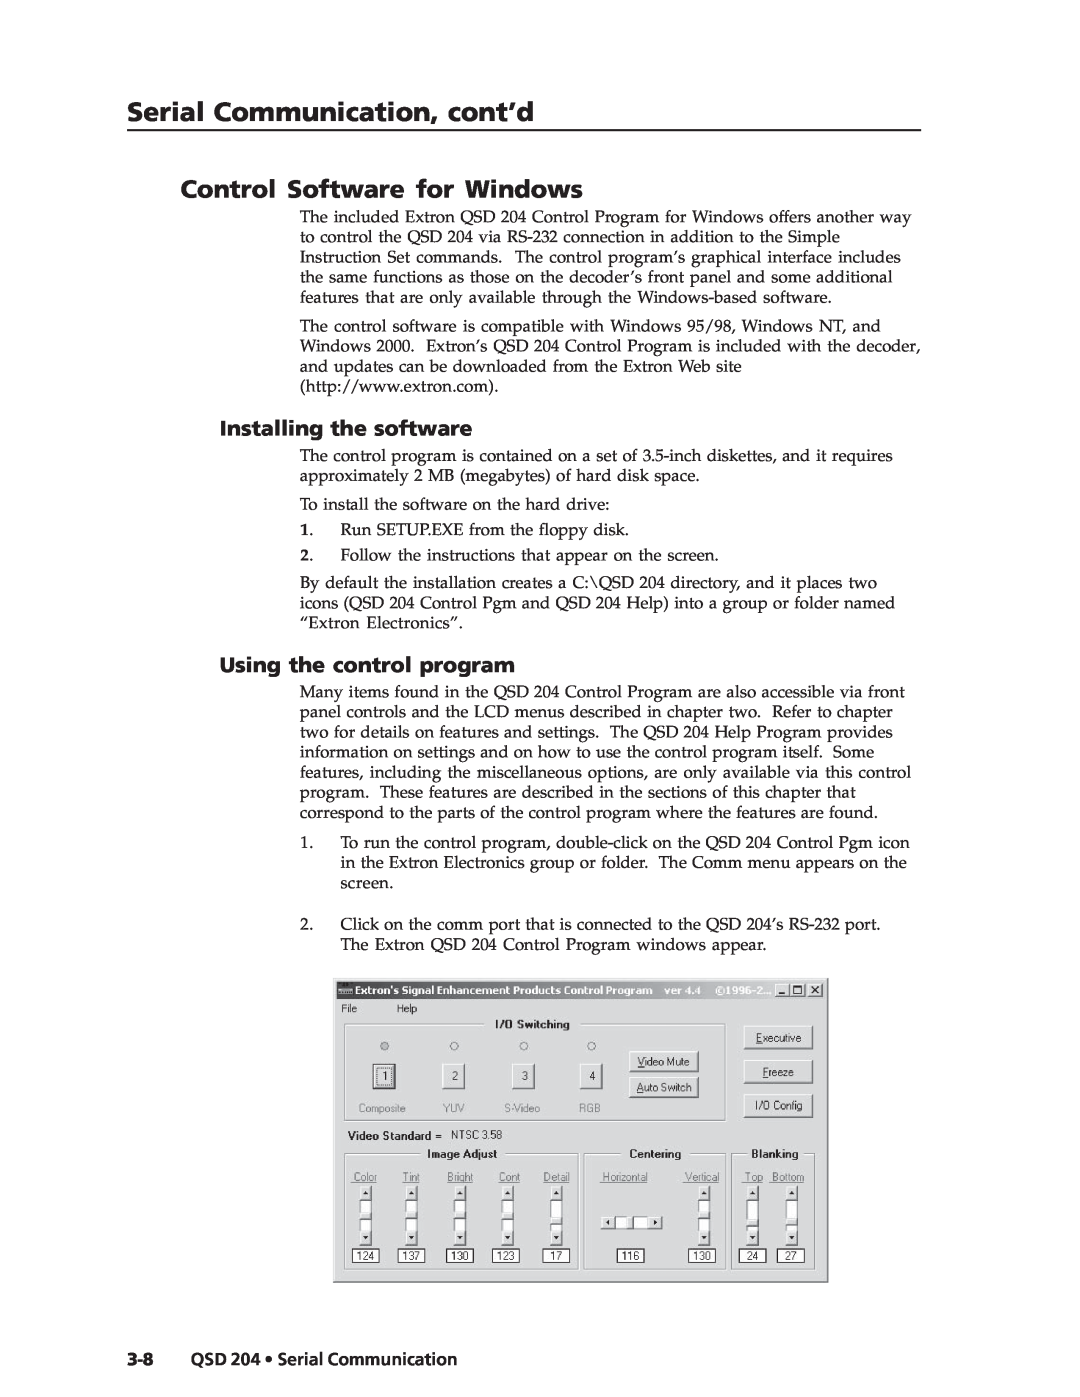 Extron electronic QSD 204 D manual Control Software for Windows, Installing the software, Using the control program 